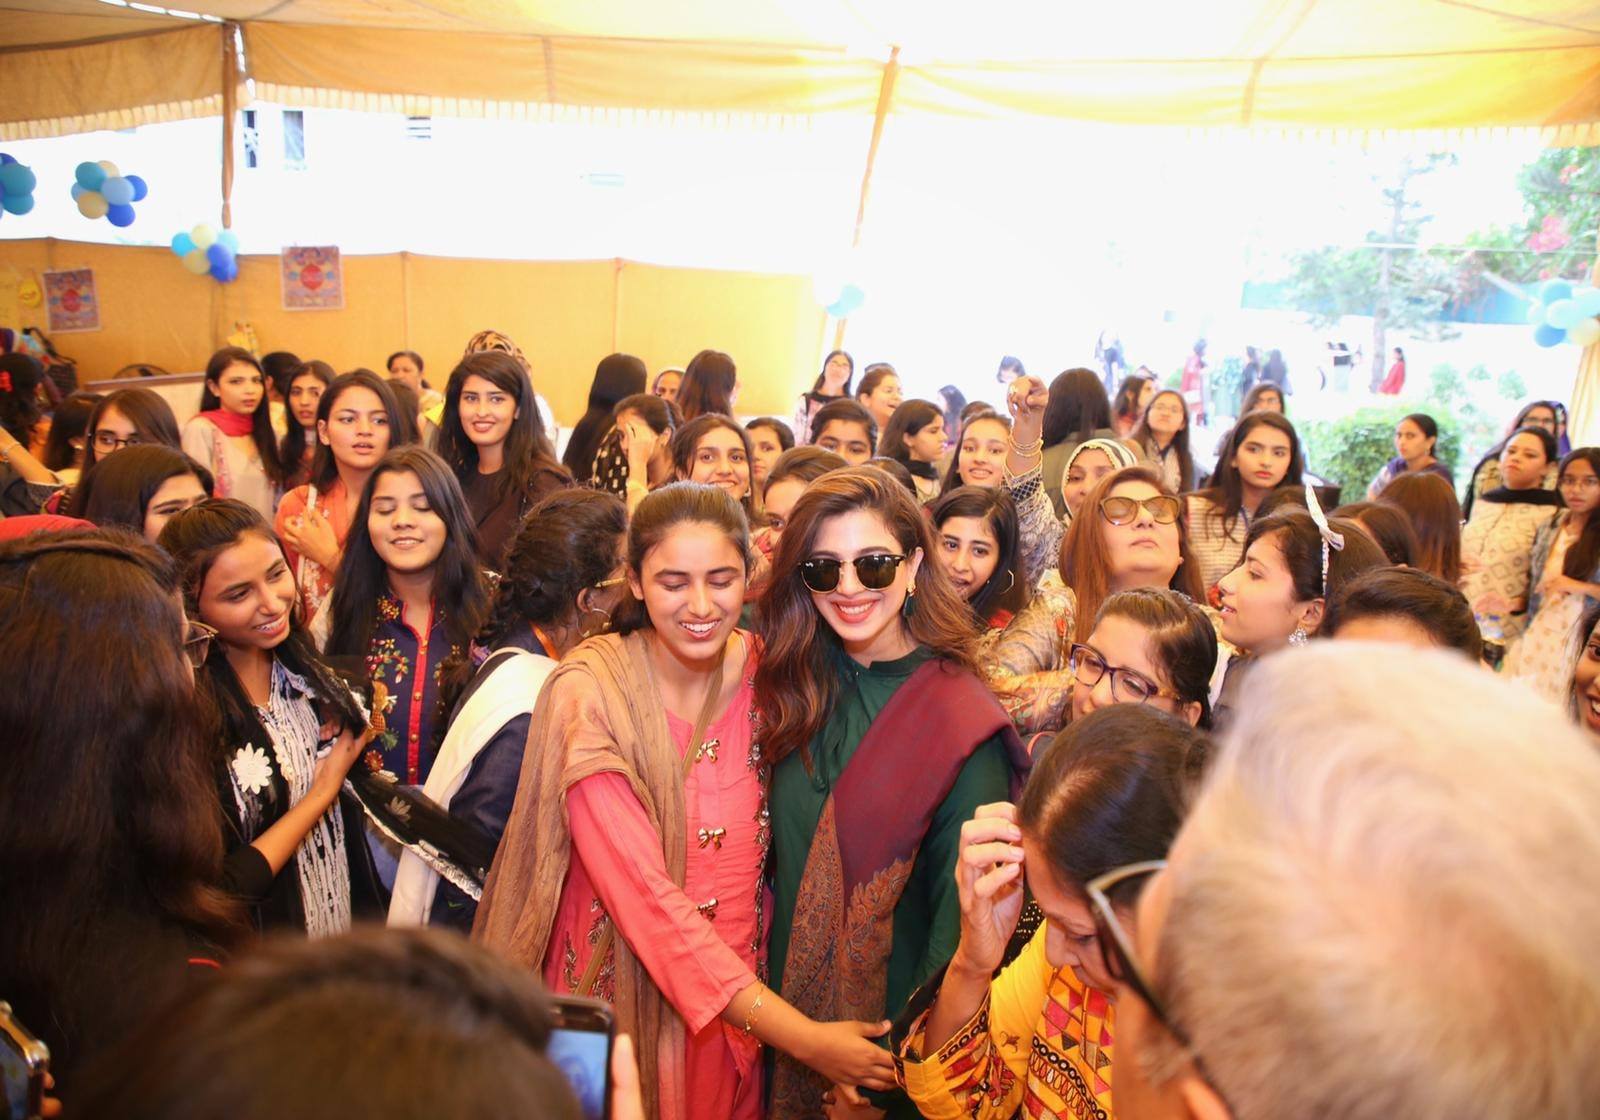 Actress Sonya Hussyn invited by An All Girls College as the Guest of Honor